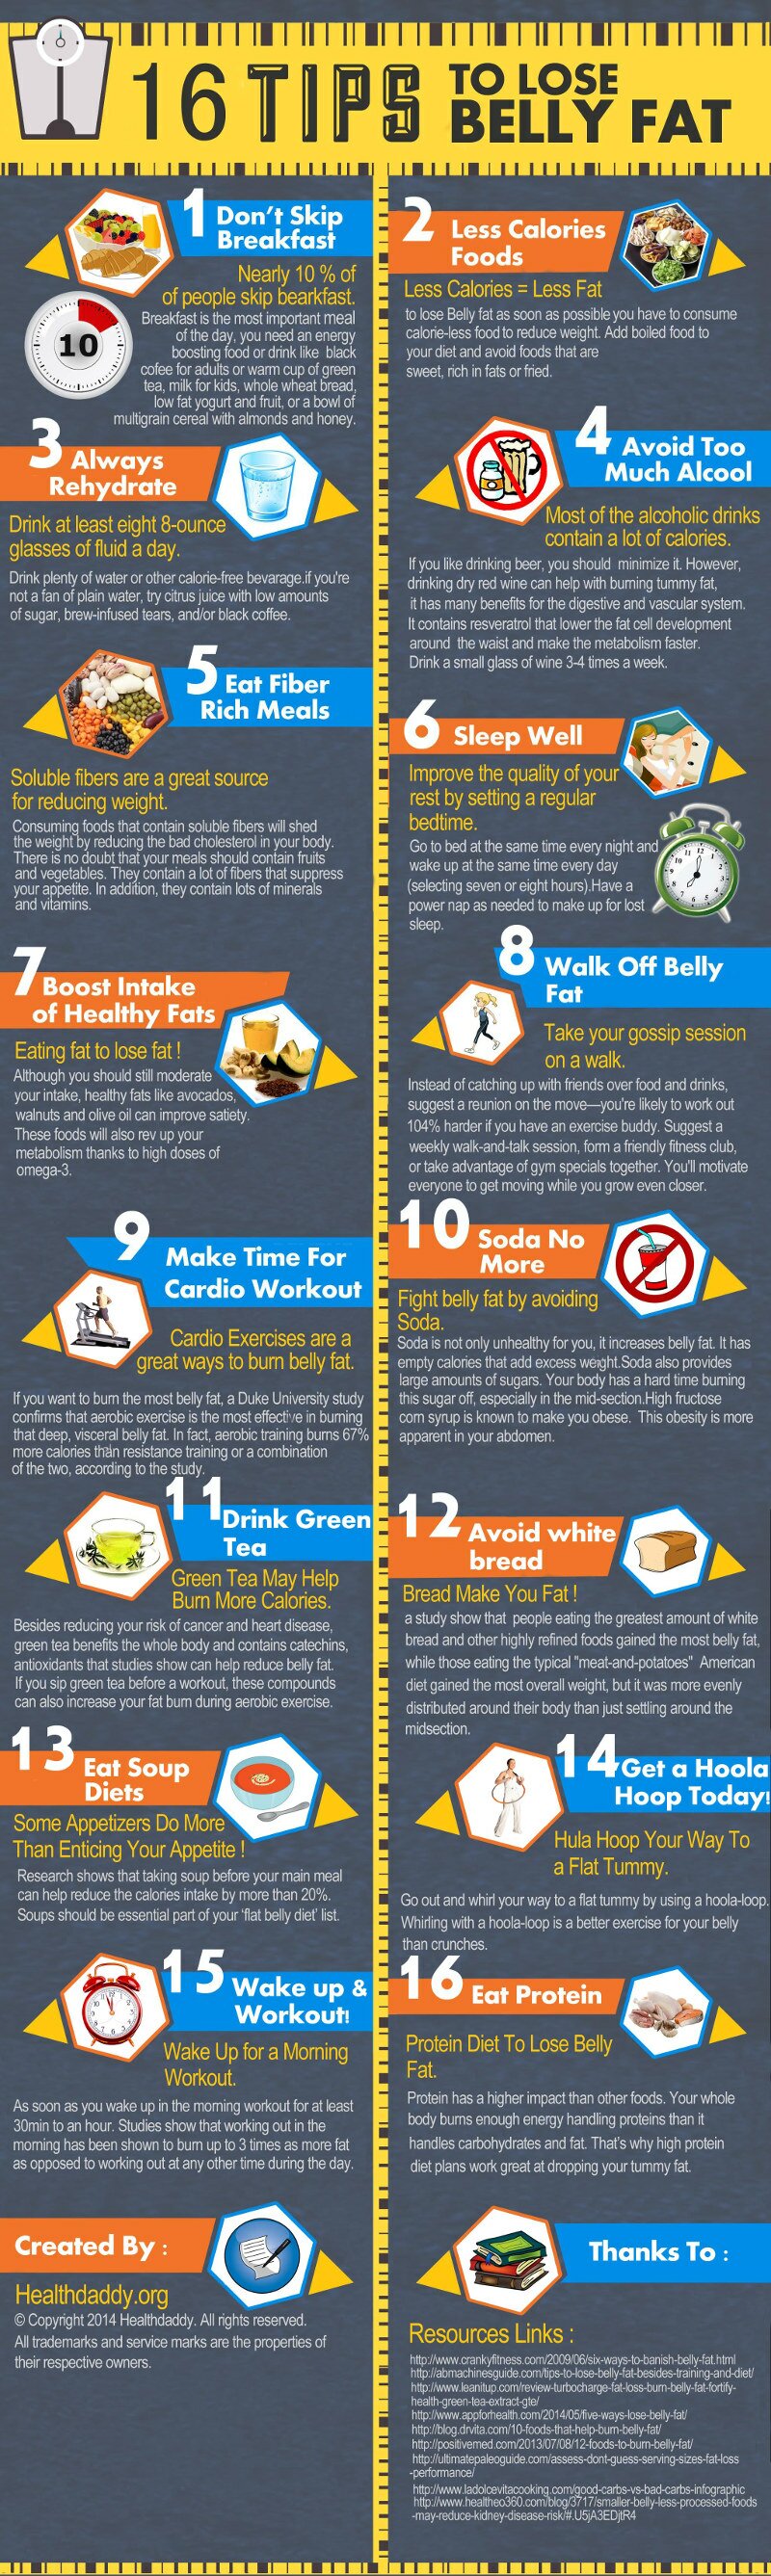 16 tips to reduce belly fat (infographic)